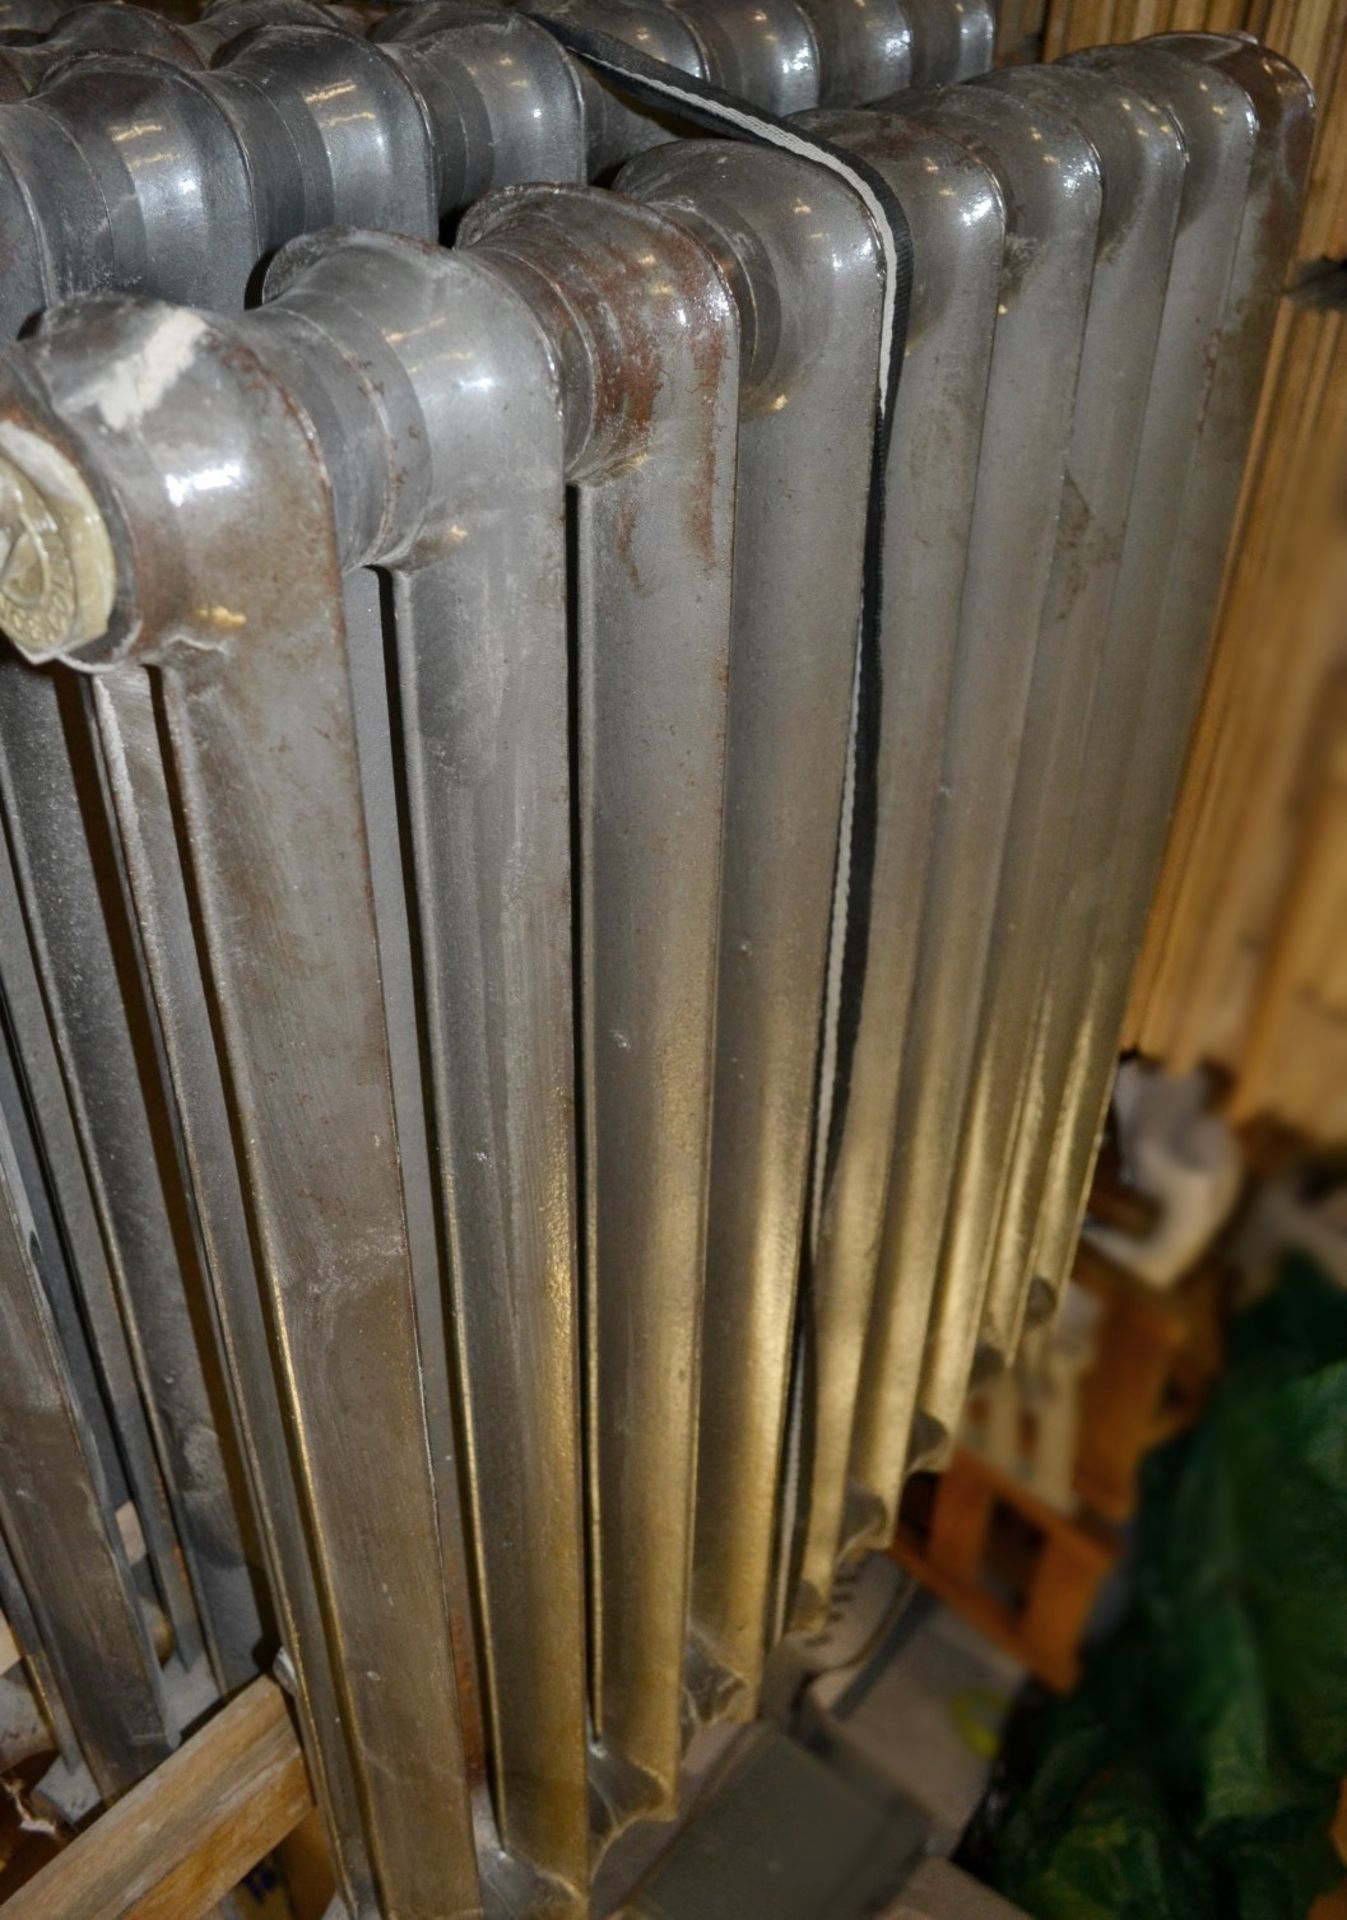 1 x Vintage Traditional Cast Iron 9-Section Radiator - Dimensions: W70 x H95cm - Ref: HM264/9sec - Image 5 of 6